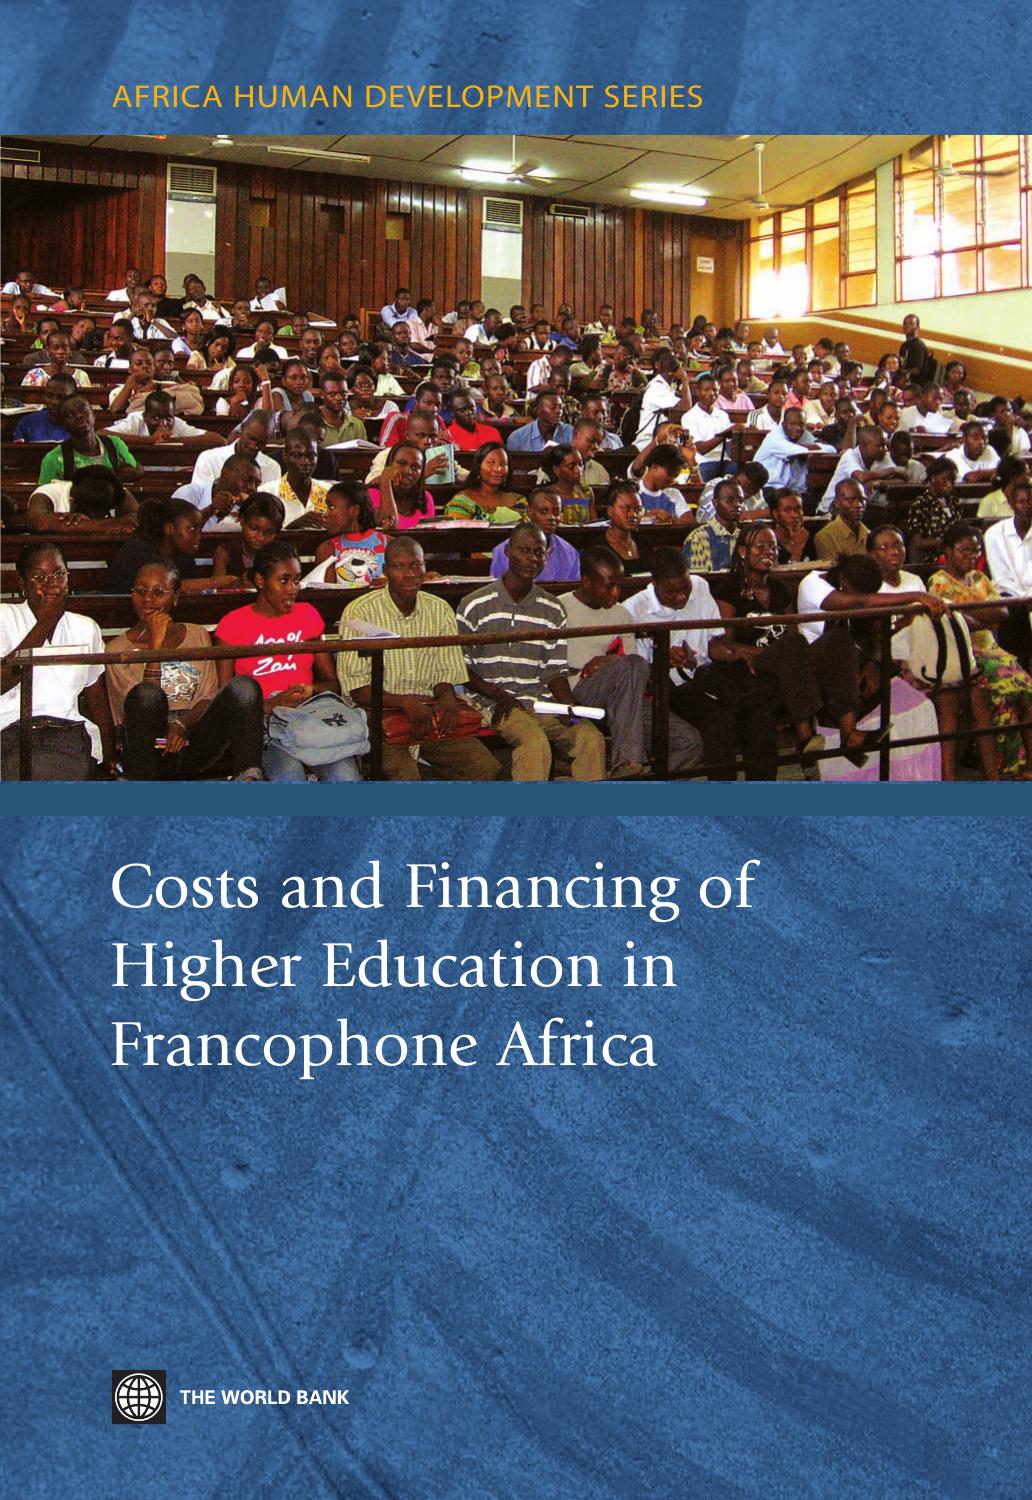 Costs and Financing of Higher Education in Francophone Africa 2008